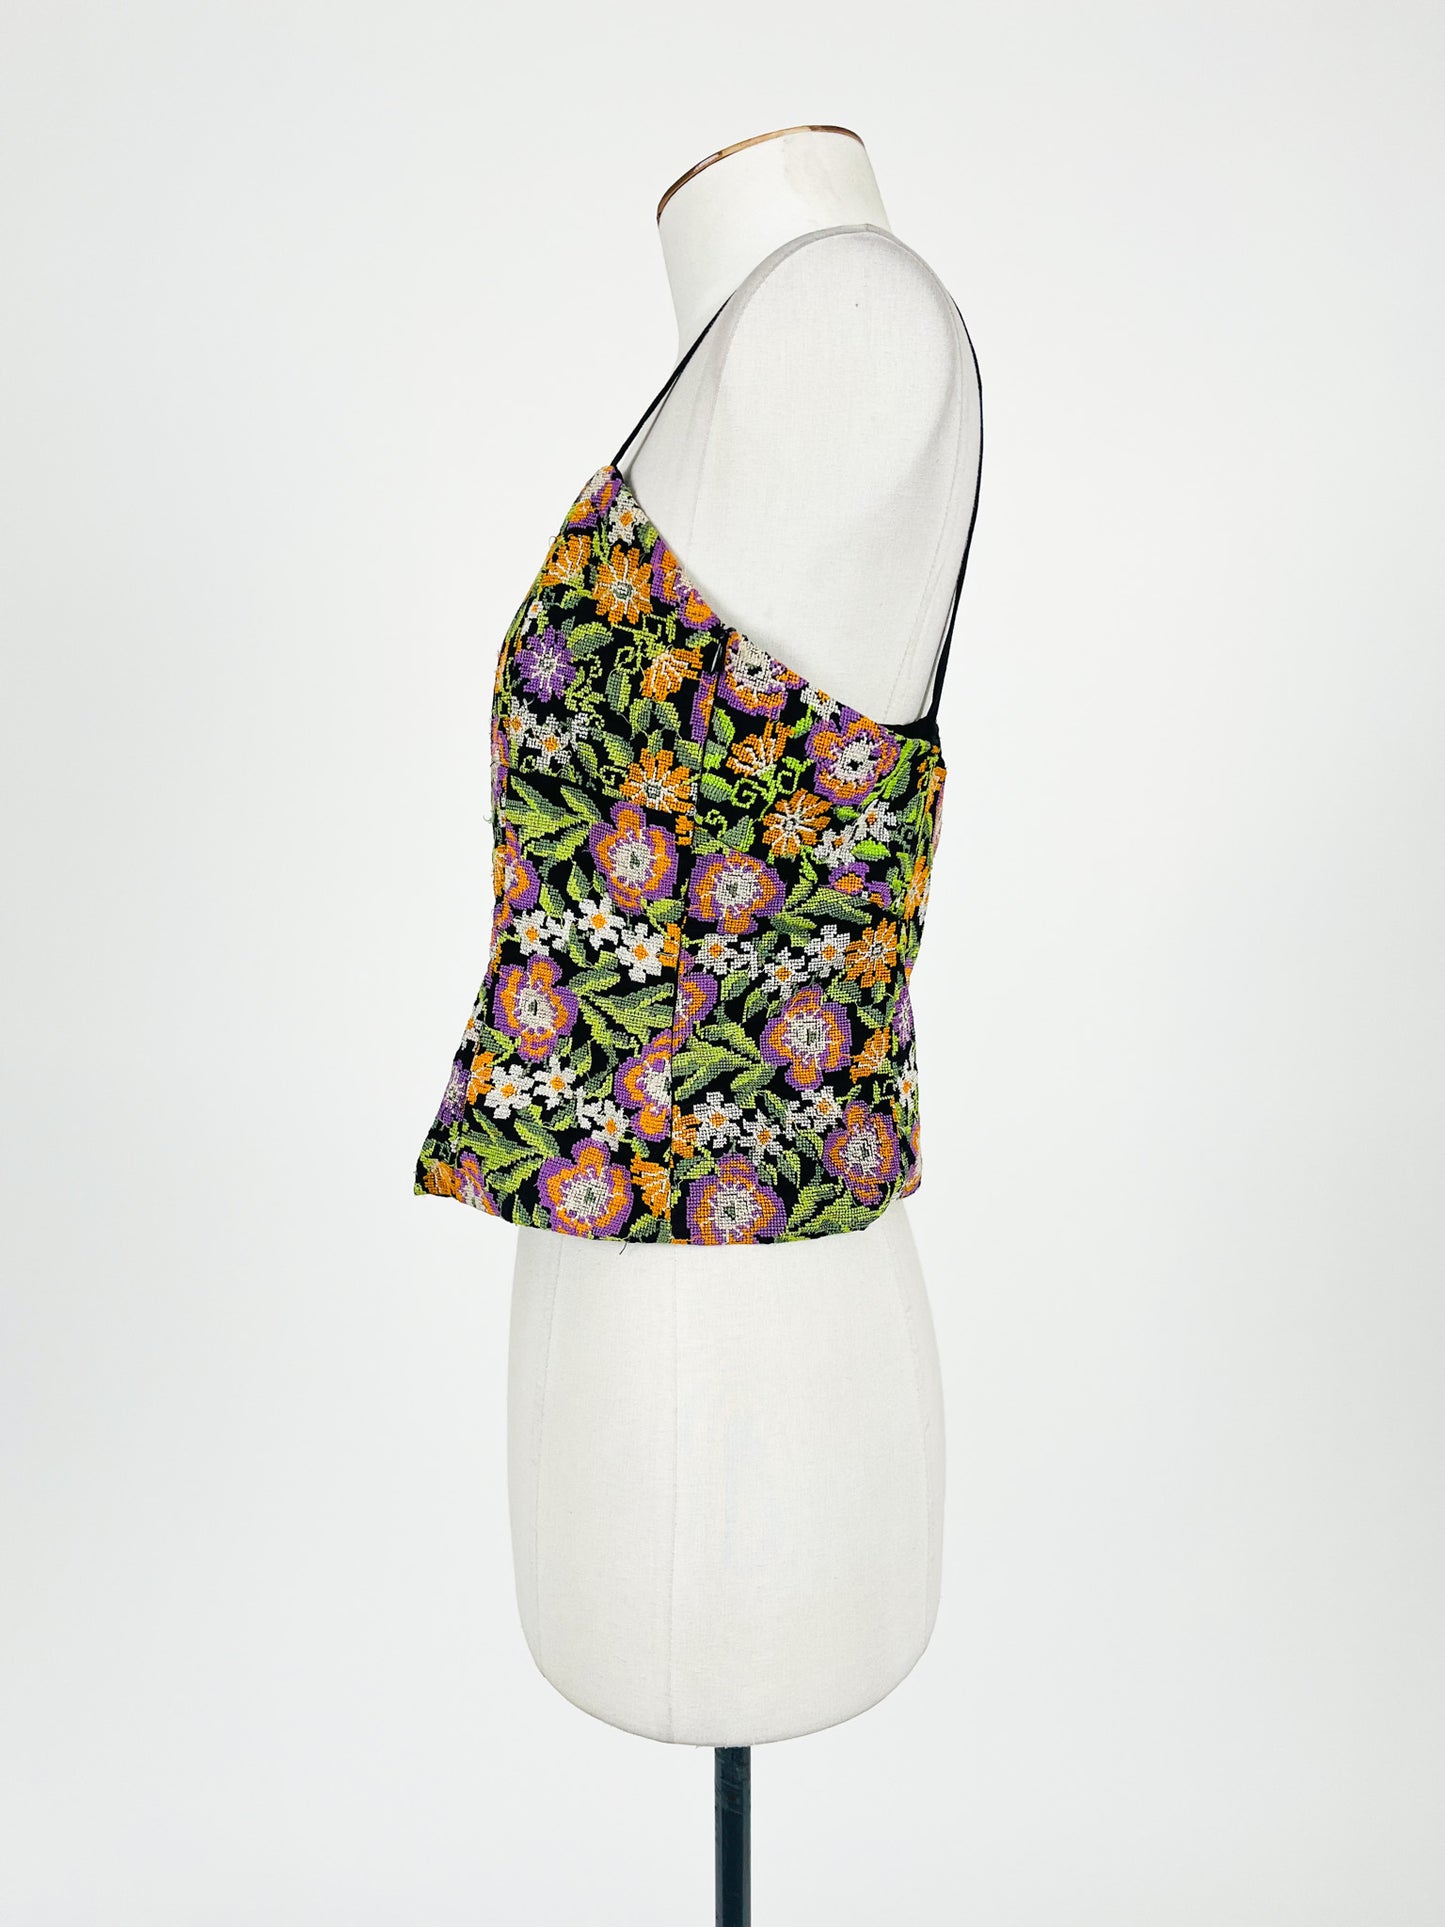 Amber Whitecliffe | Multicoloured Casual Top | Size 8